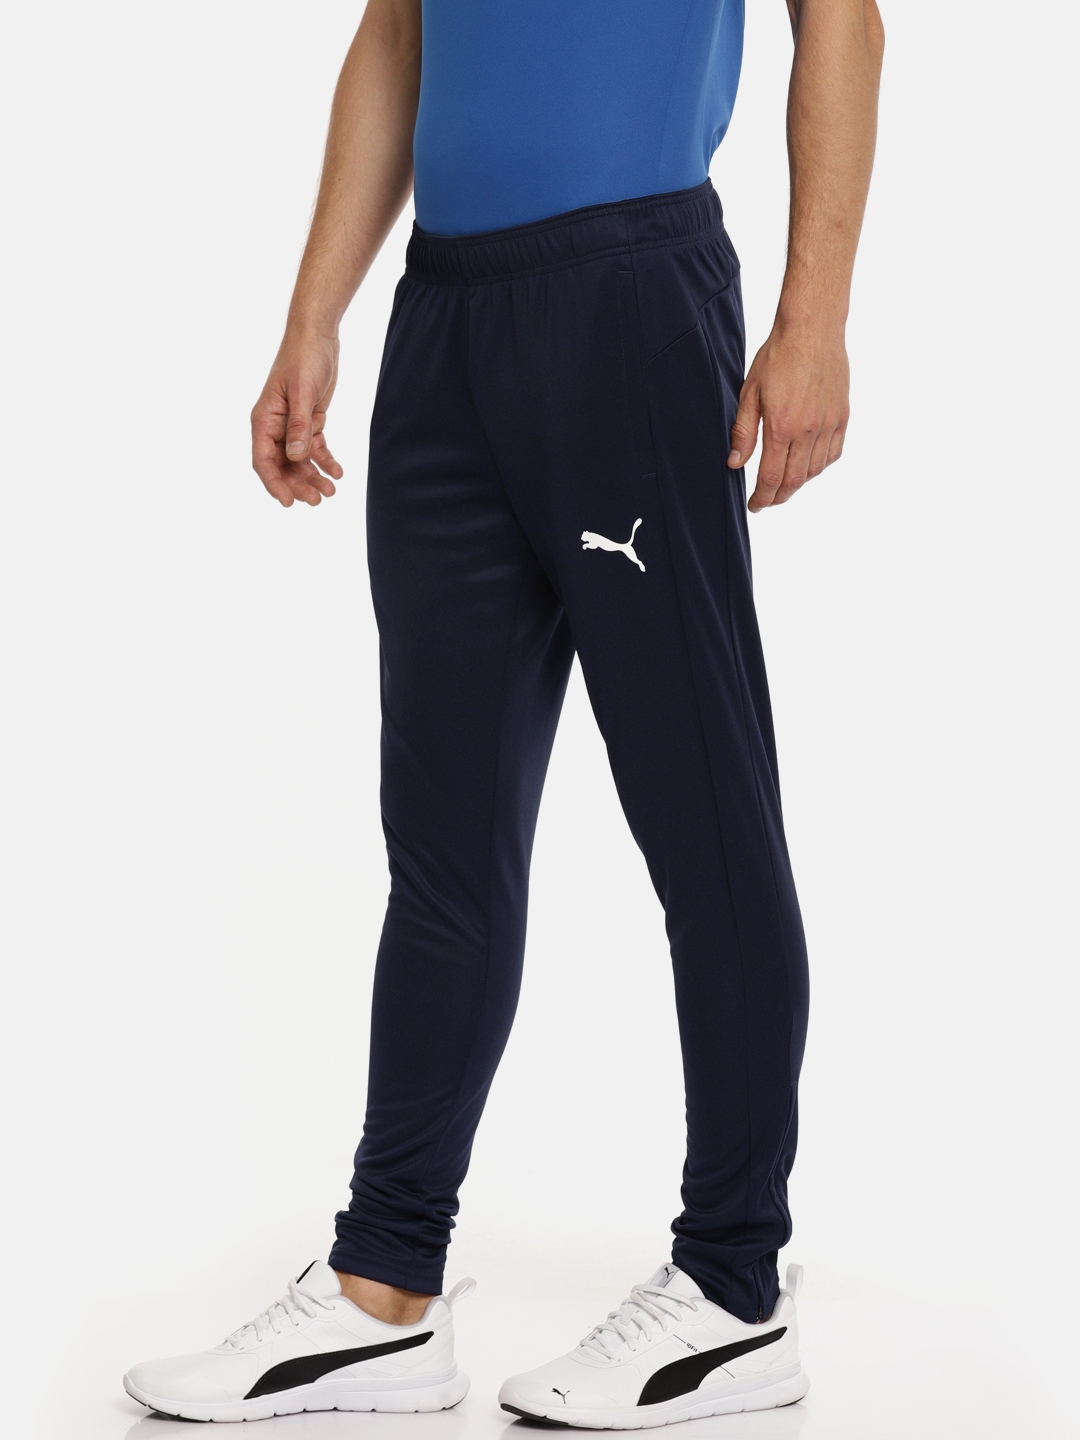 Russell Athletic Navy Tricot Track Pants  Urban Outfitters UK